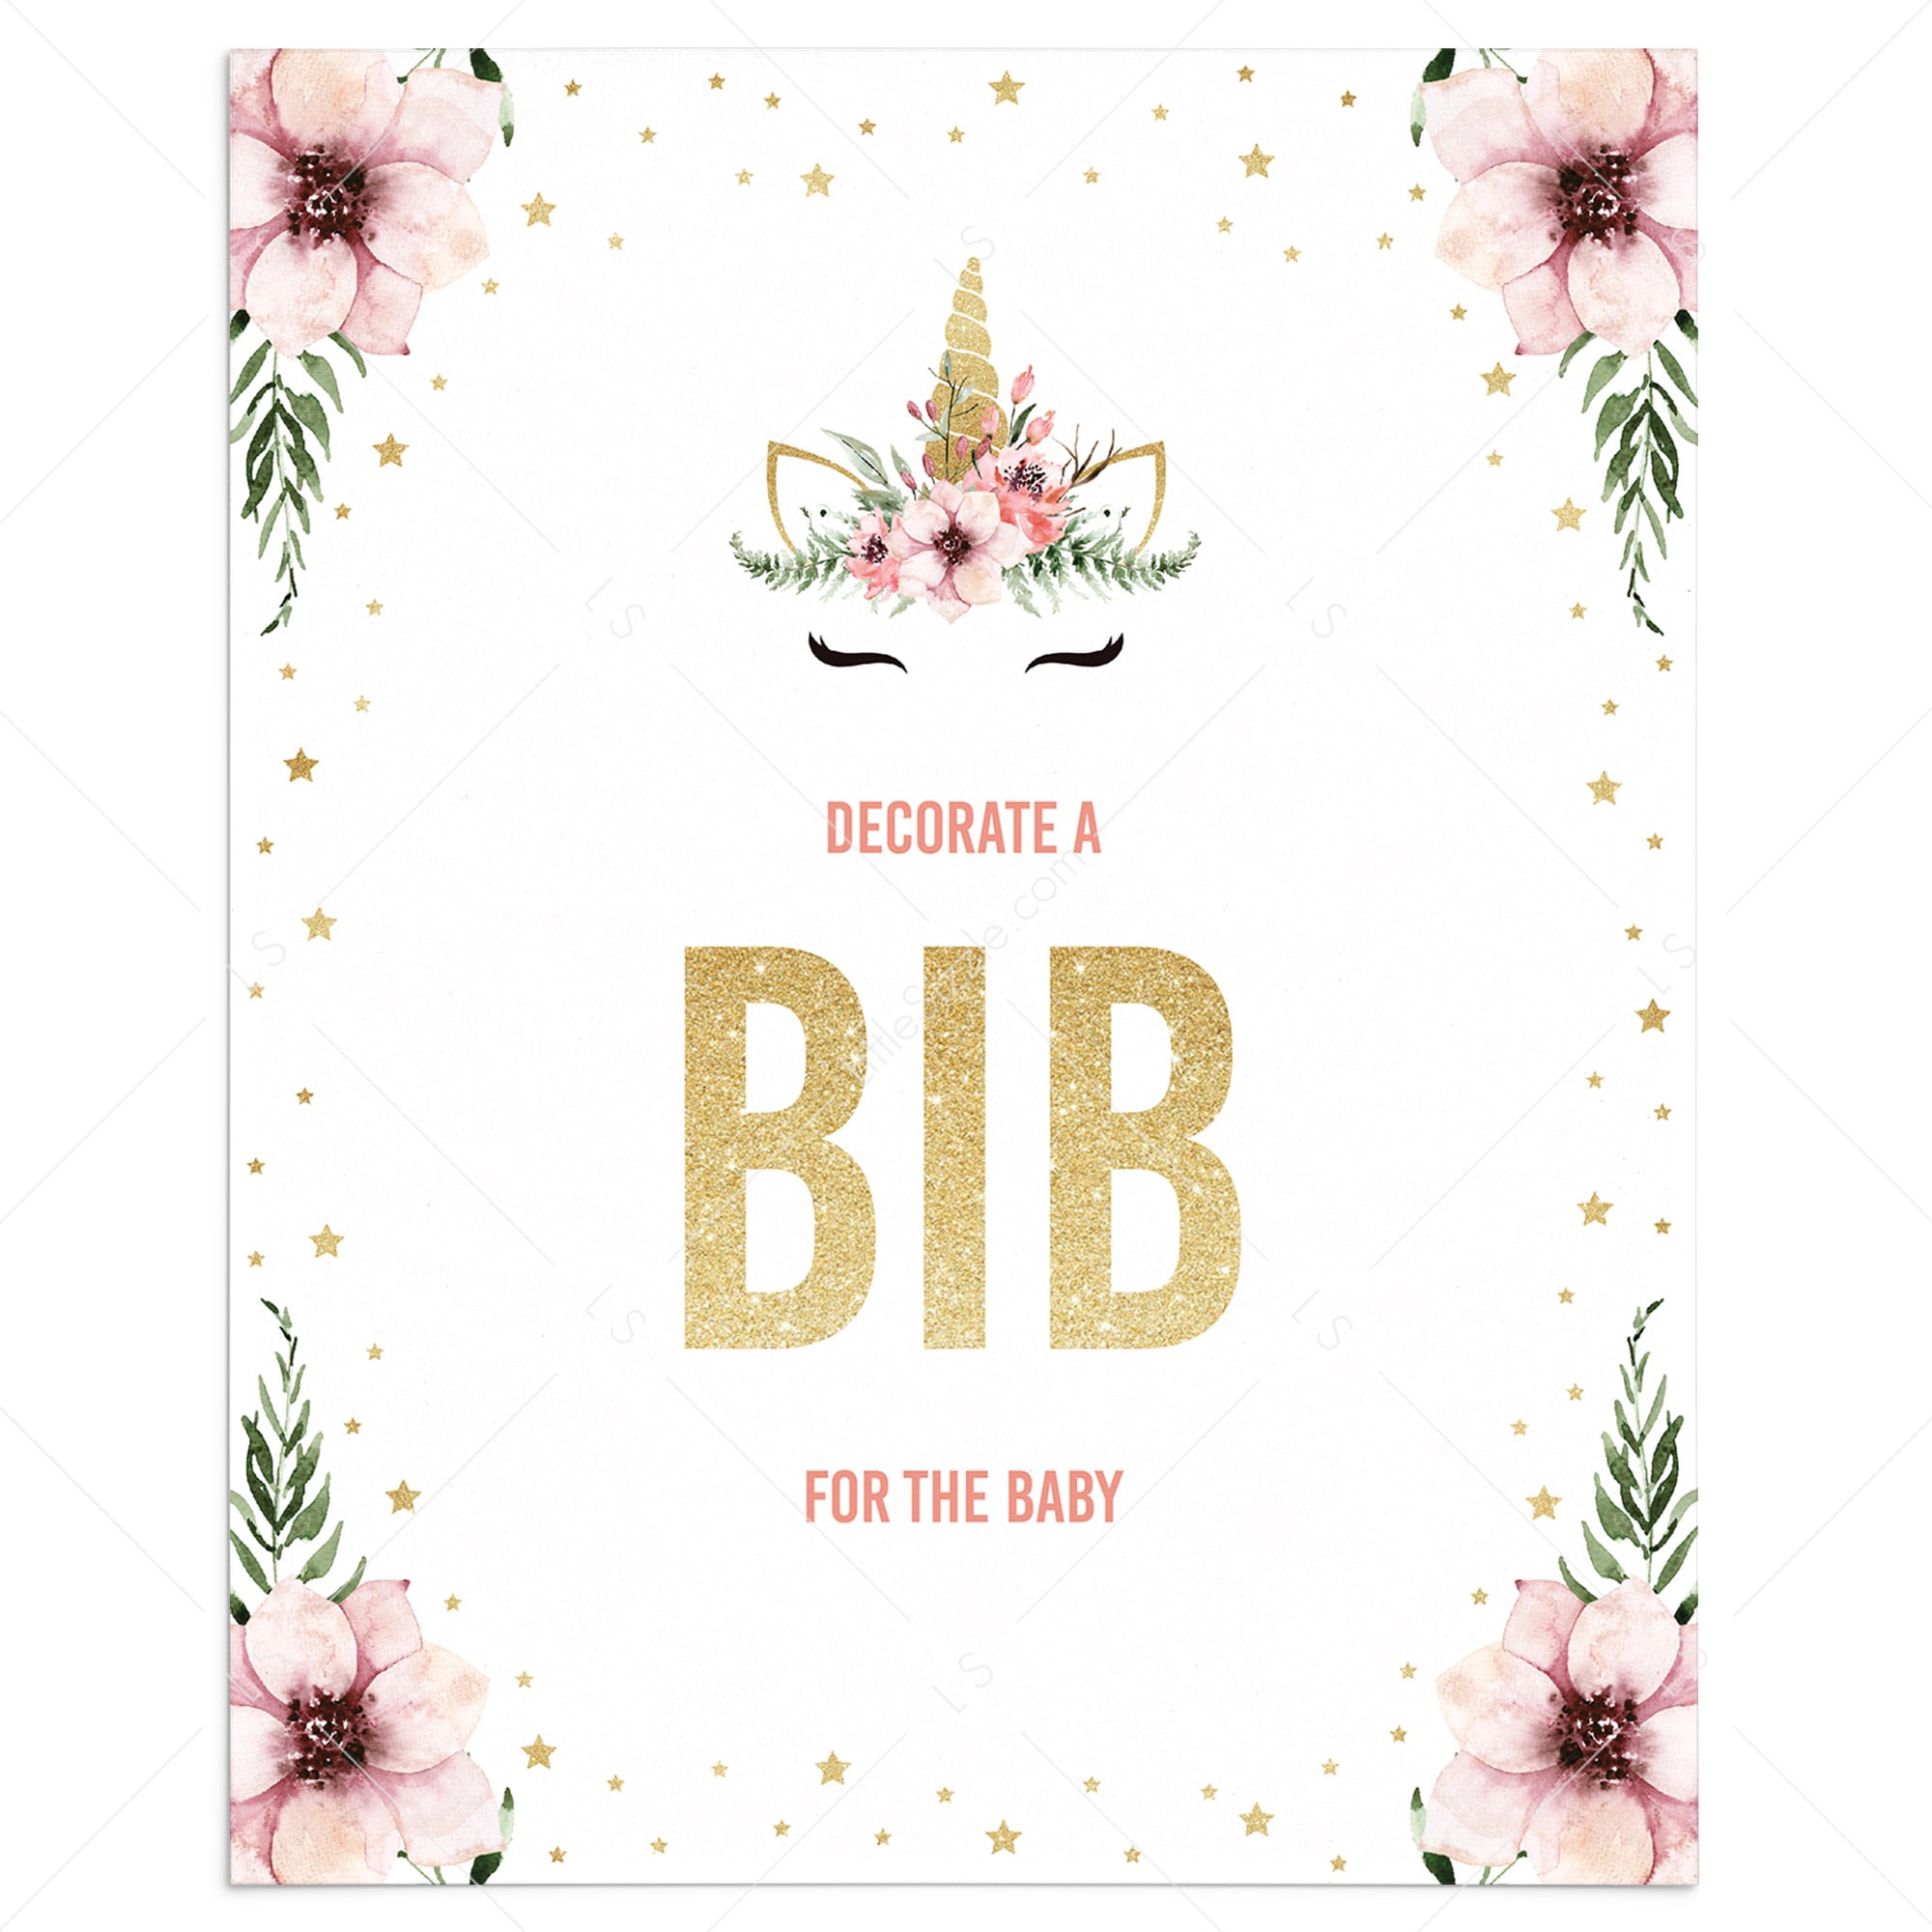 Gold baby shower decorate a bib sign printable by LittleSizzle